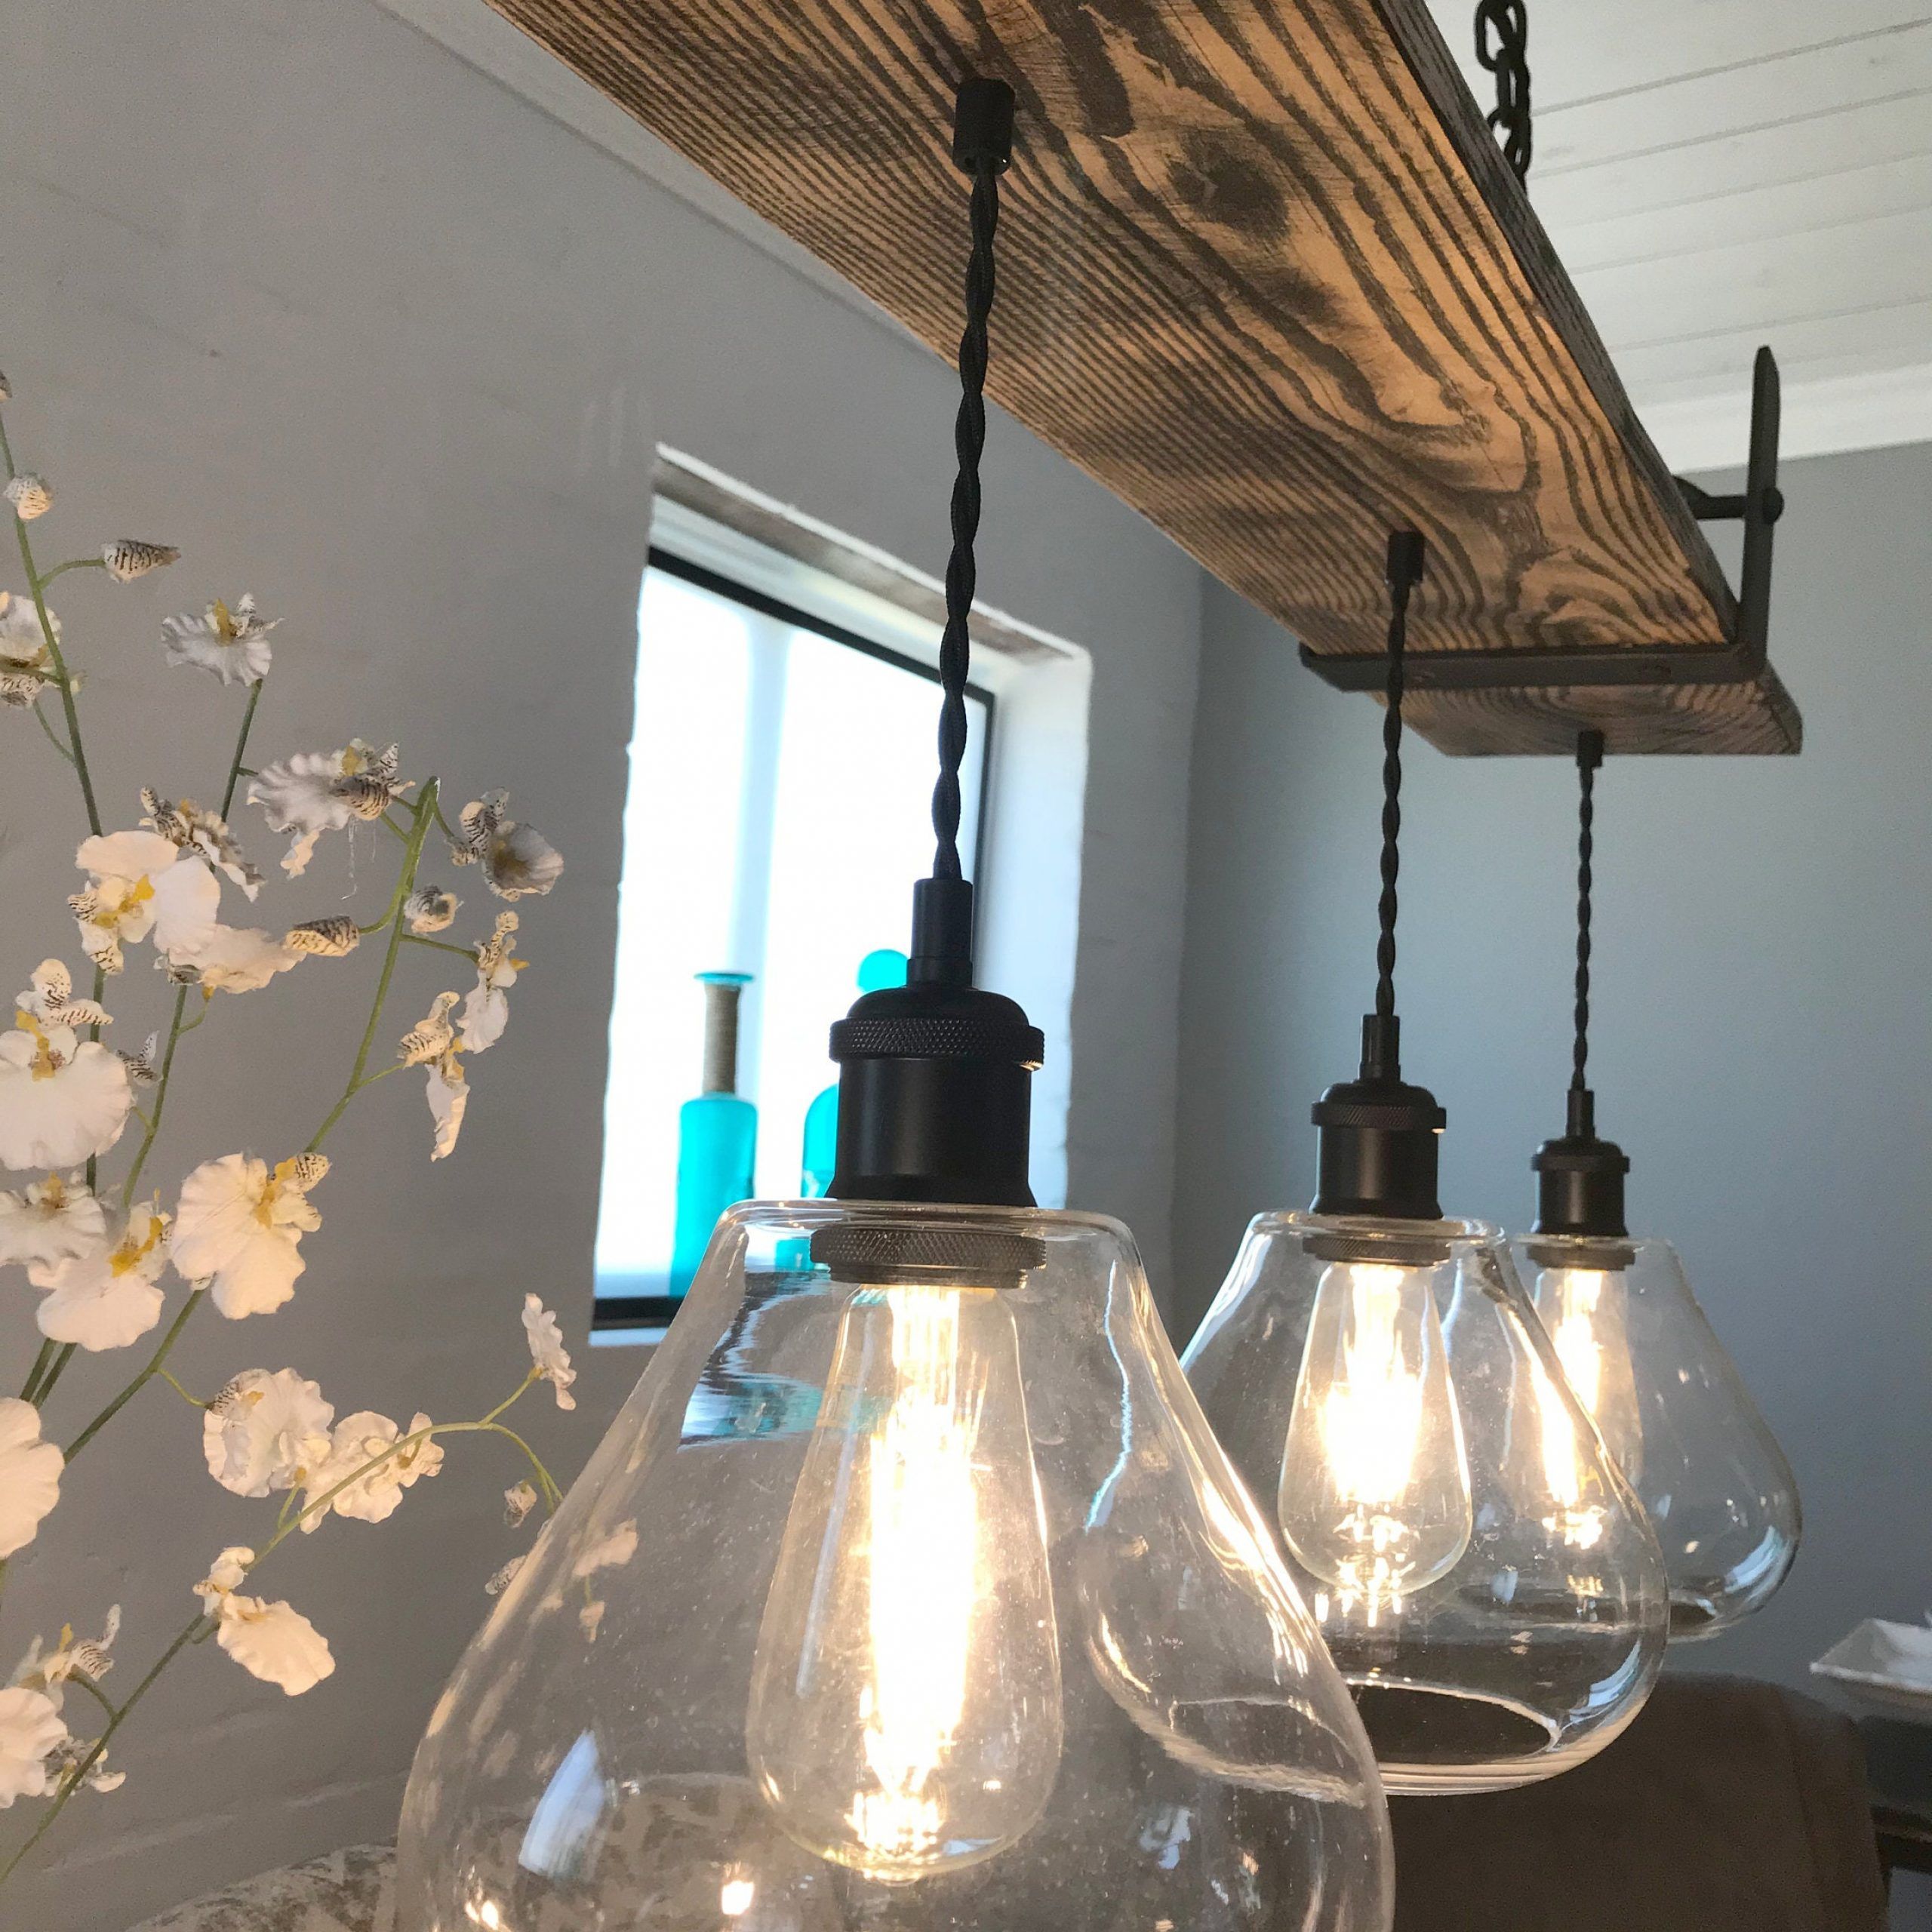 Famous Distressed Oak Lantern Chandeliers With Aged Oak Wood 4 Hanging Light Chandelier With Barnwood Beam – Etsy (View 10 of 15)